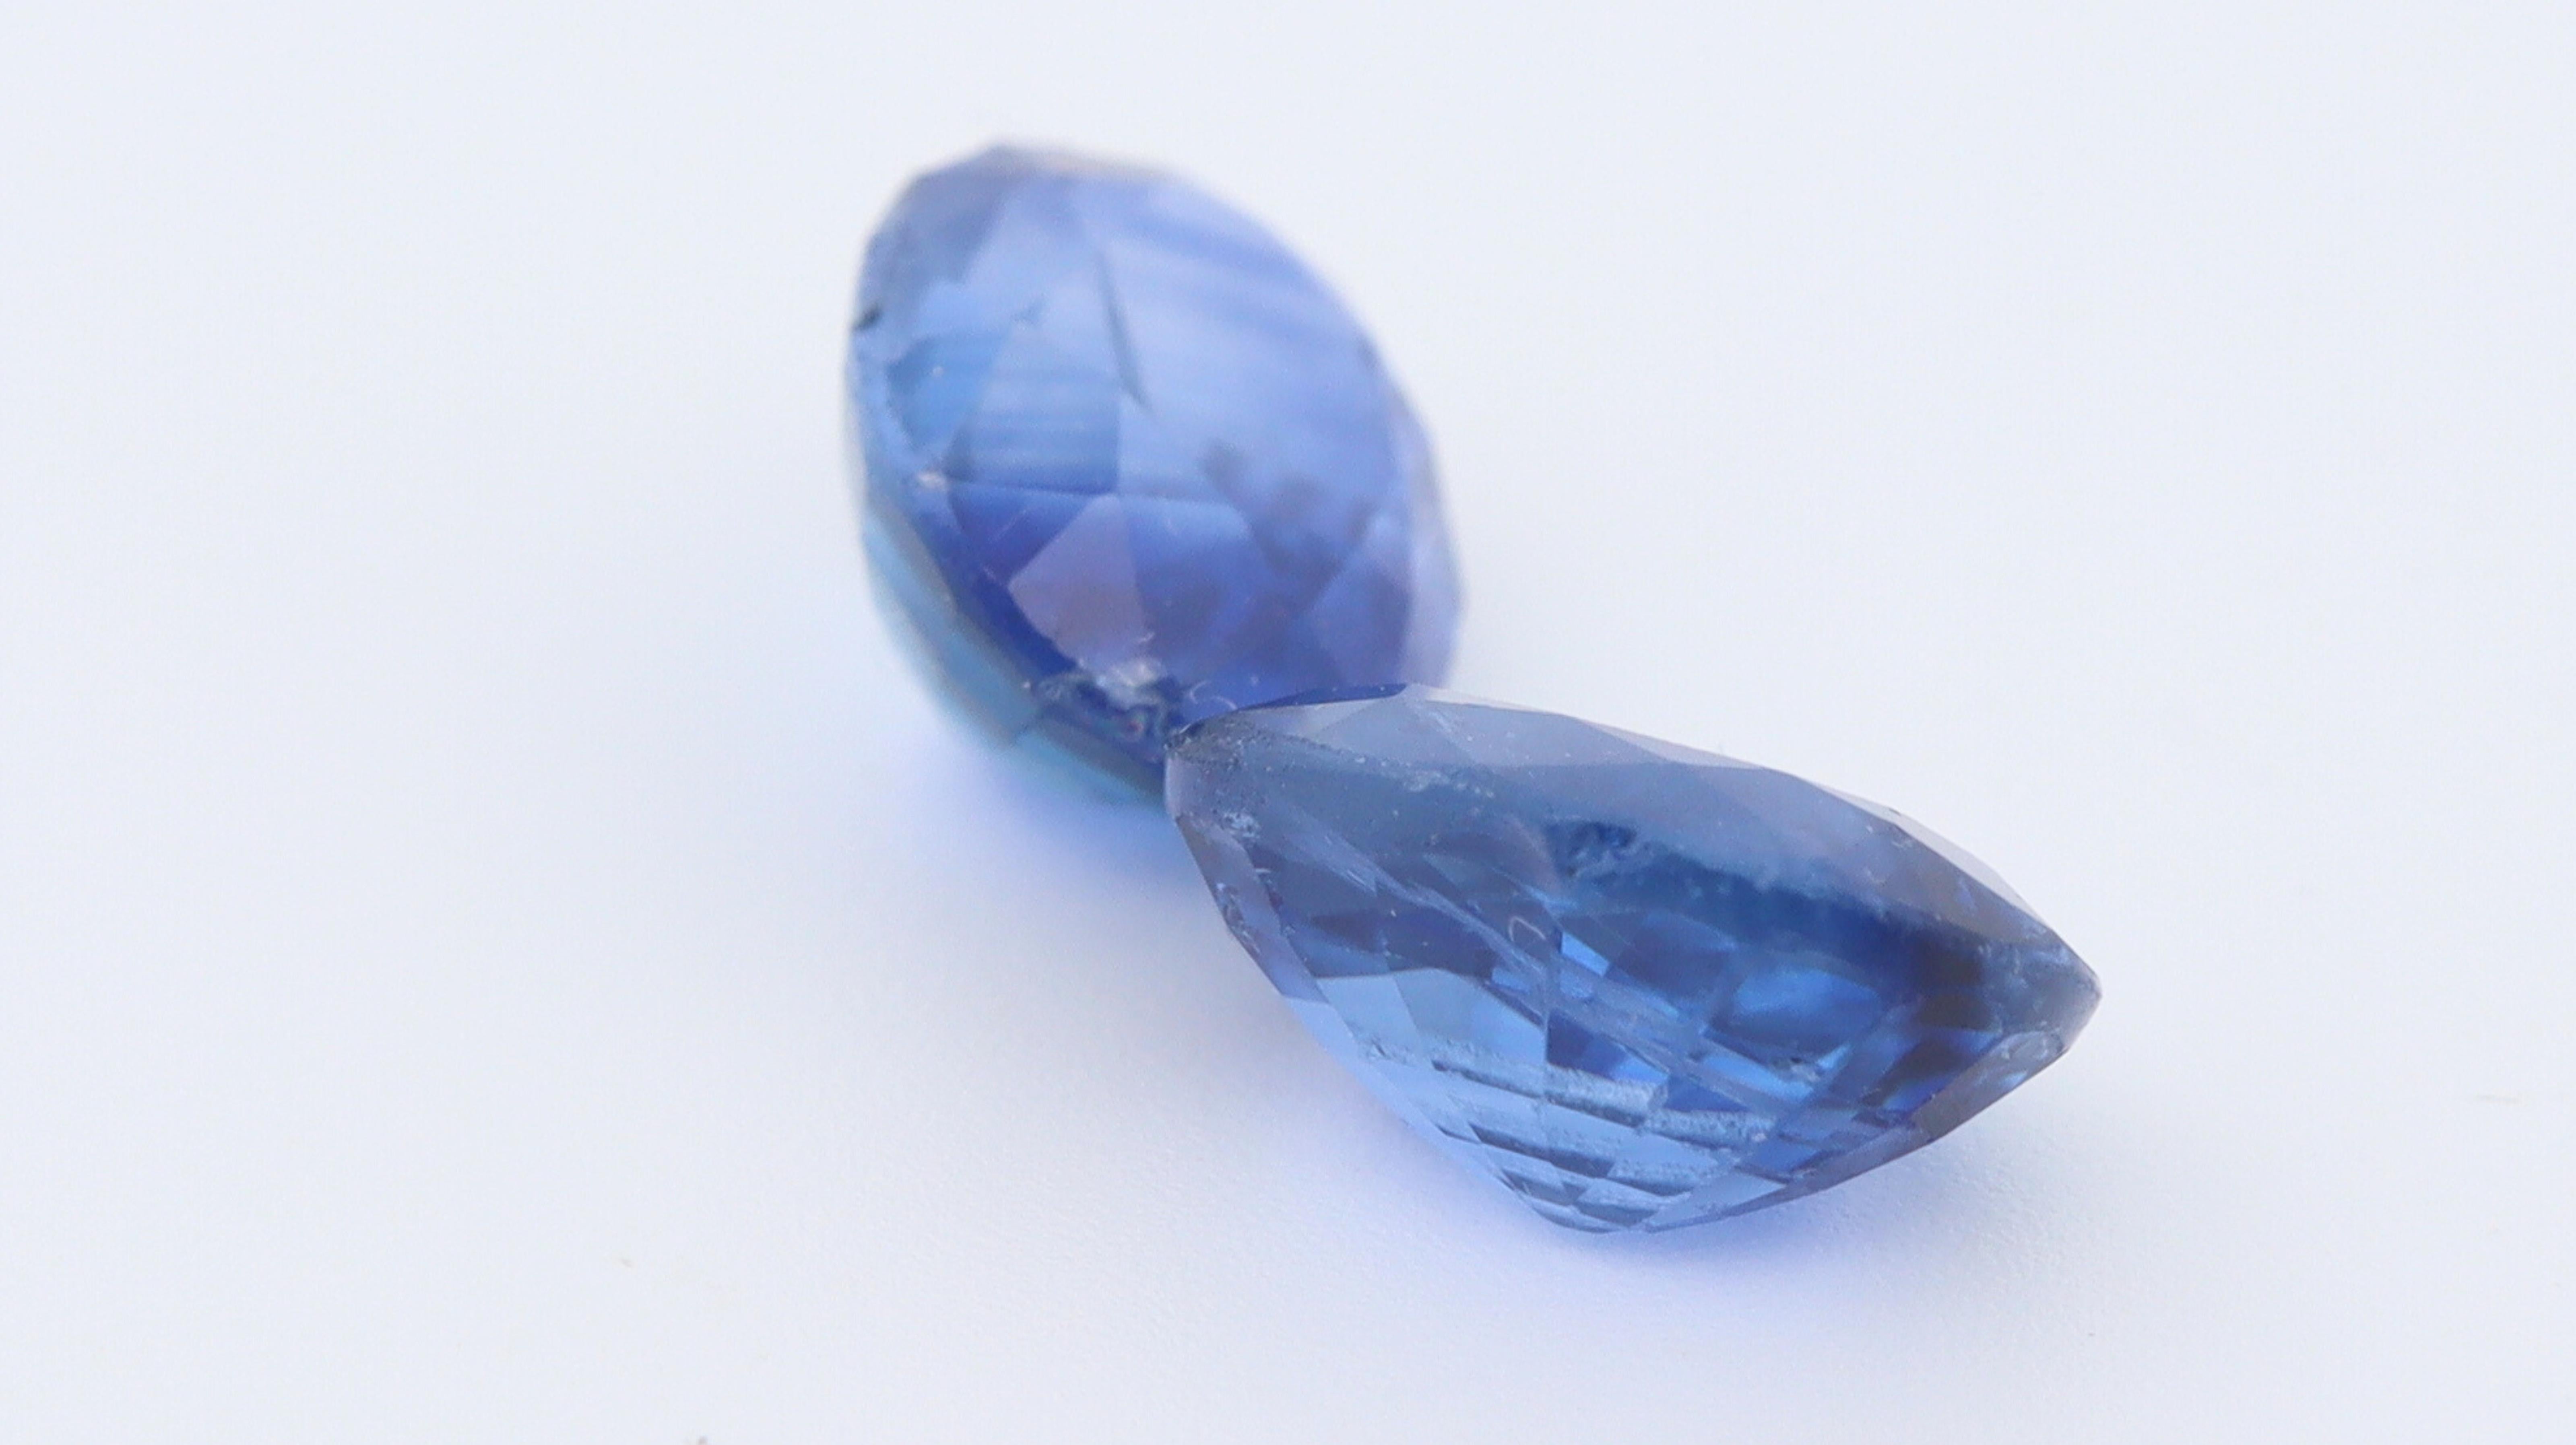 Certified Pair of Oval Blue Sapphires from Sri Lanka - 2.82ct For Sale 2